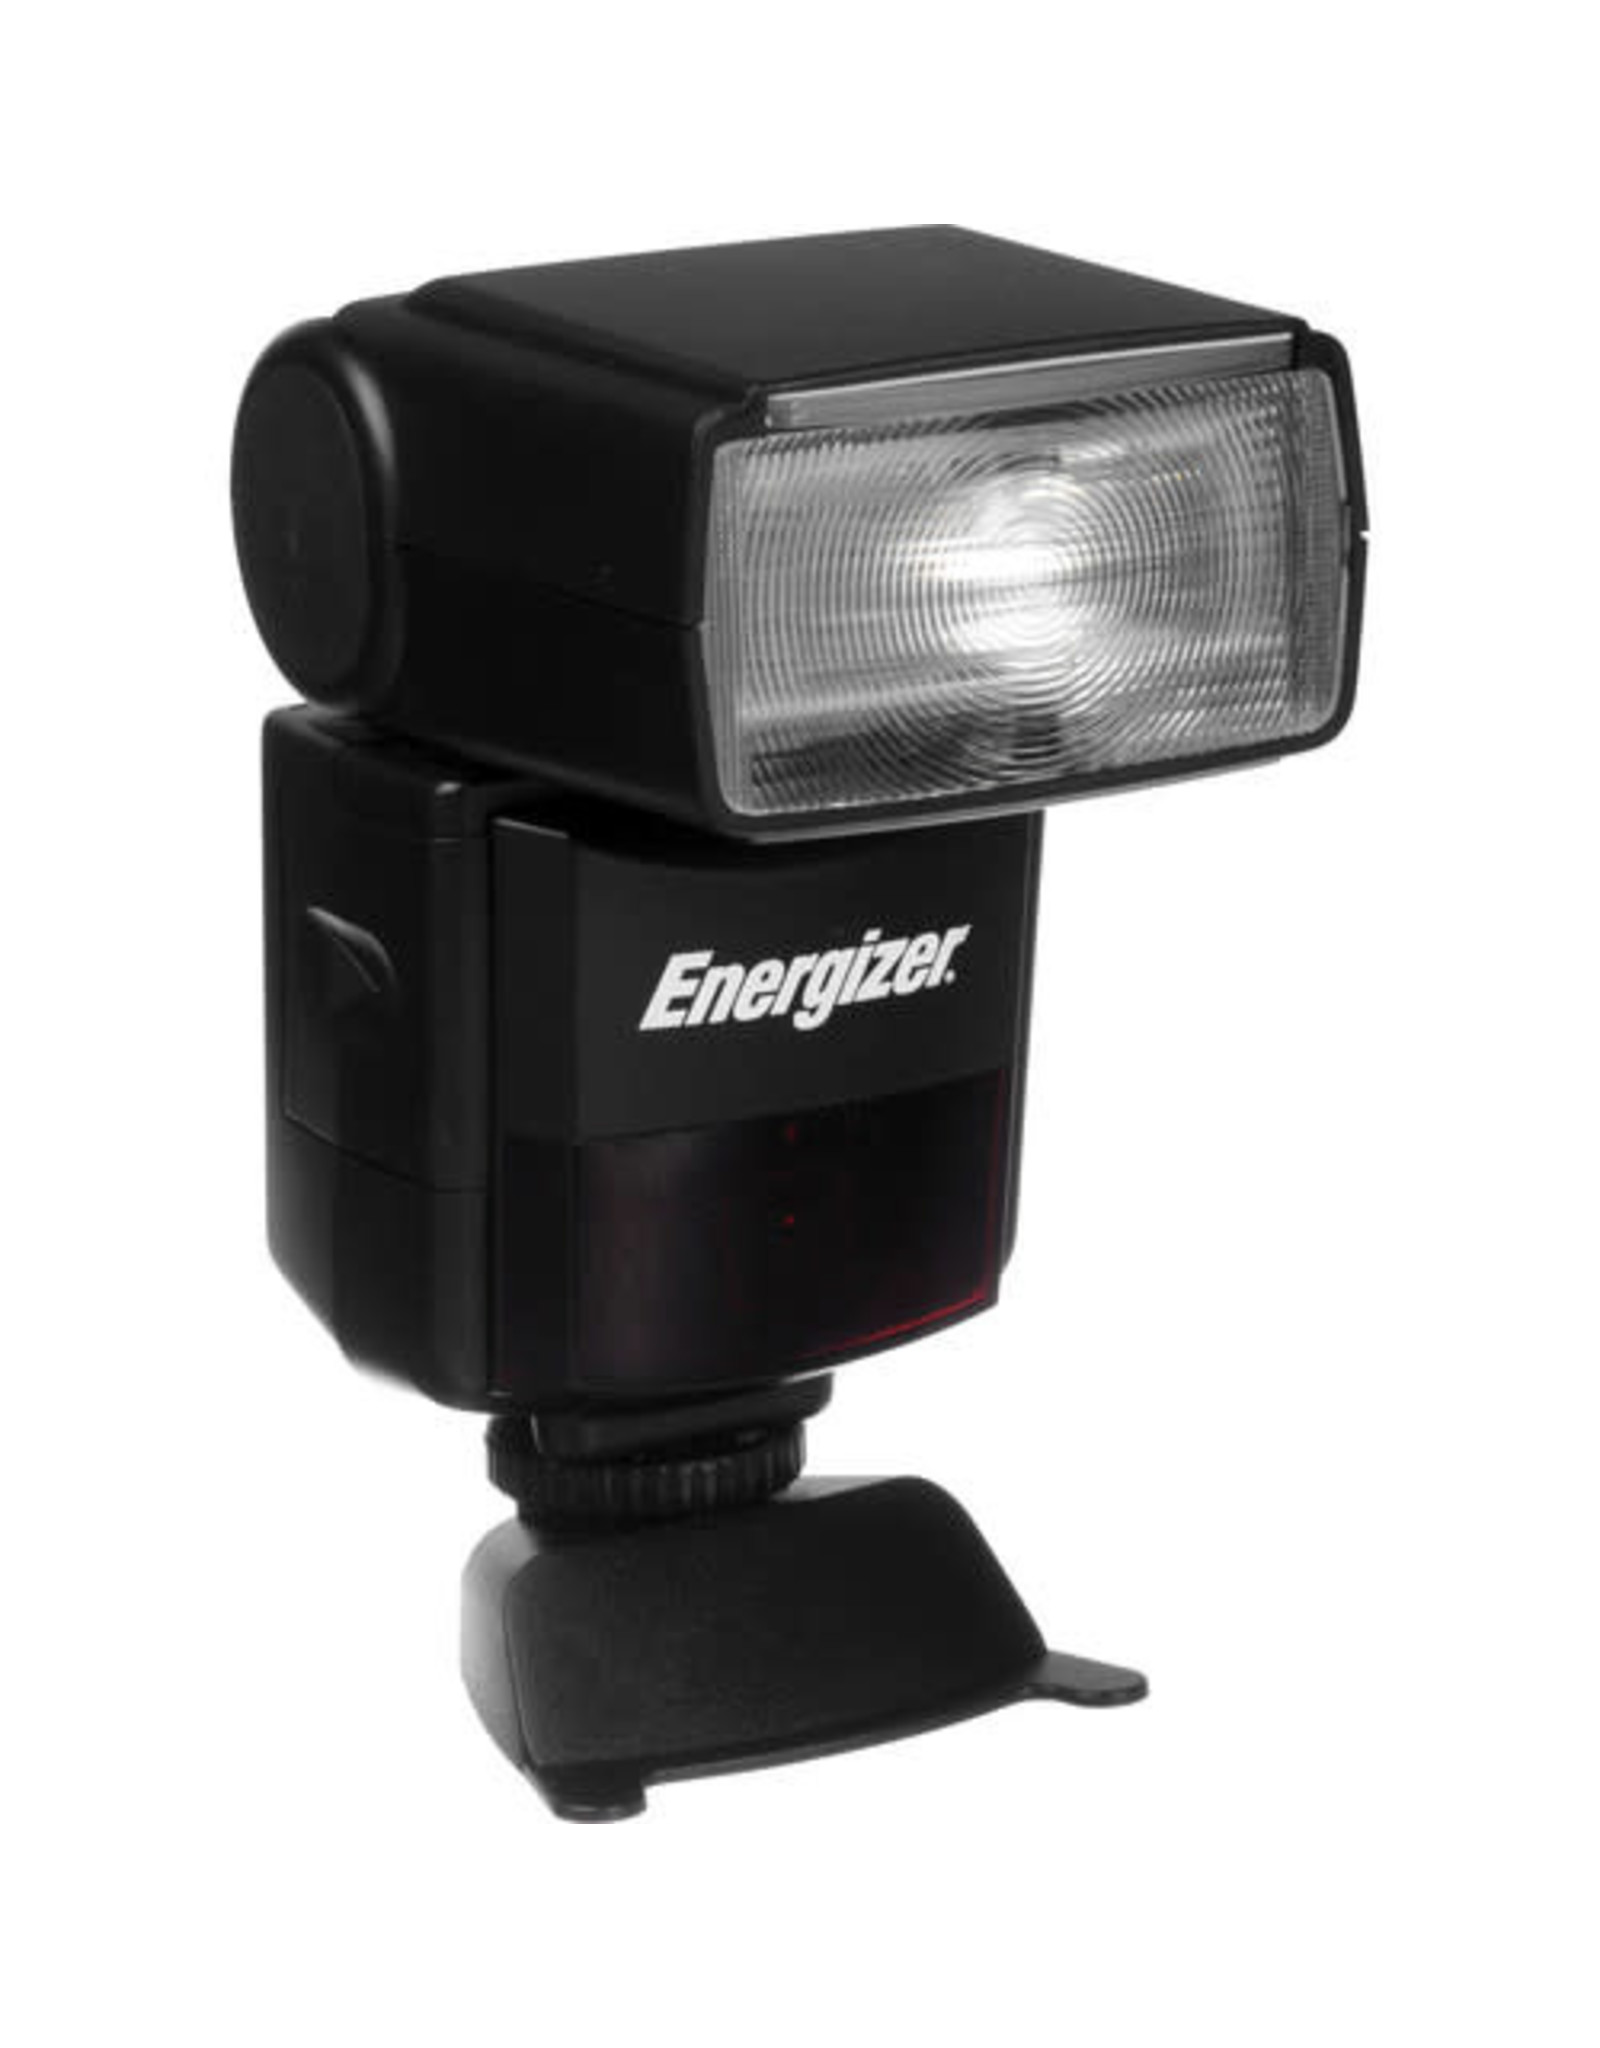 Energizer ENF-600C Power Zoom Flash for Canon EOS (LIMITED QUANTITIES)